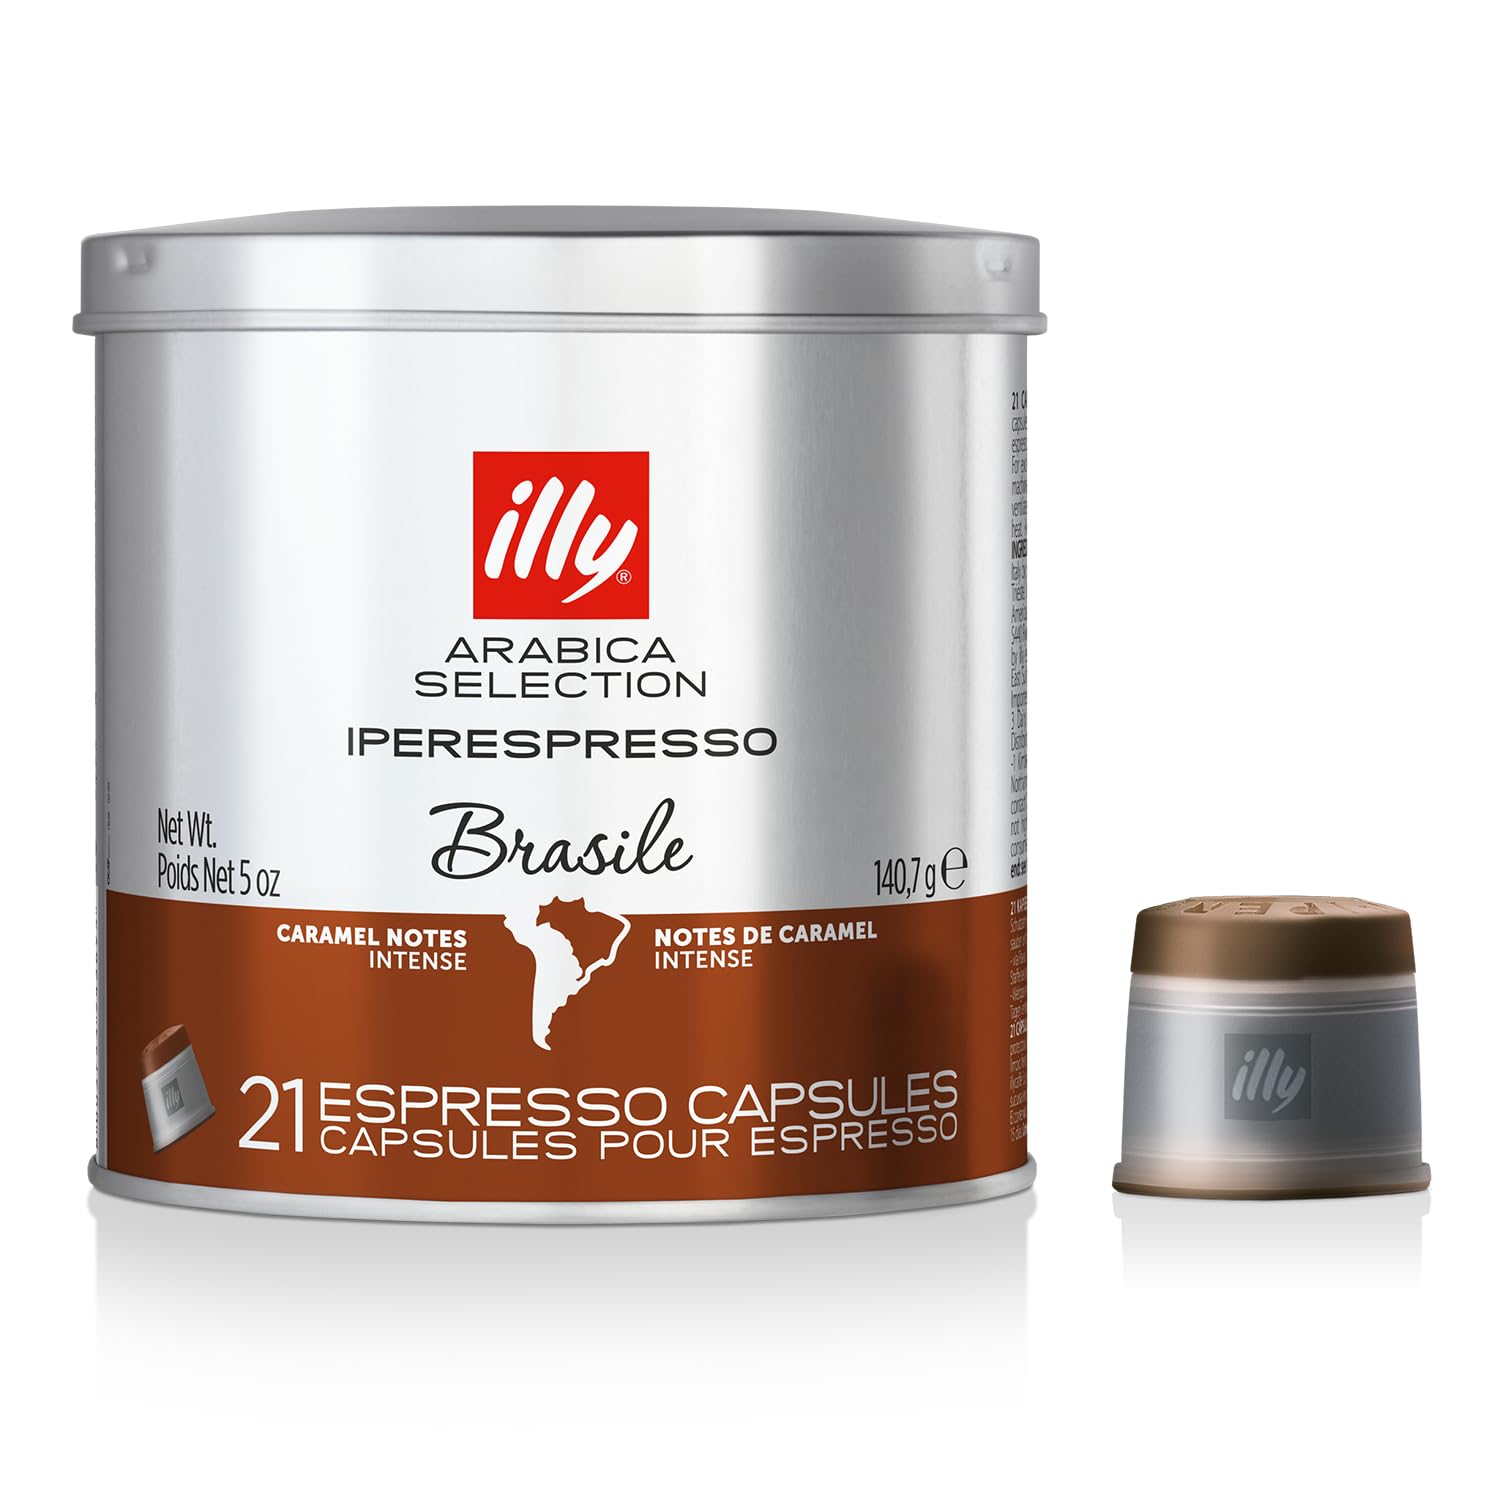 illy Coffee iperEspresso Capsules - Single-Serve Coffee Capsules & Pods - Single Origin Coffee Pods – Brasile Roast with Notes of Caramel - For iperEspresso Capsule Machines – 21 Count